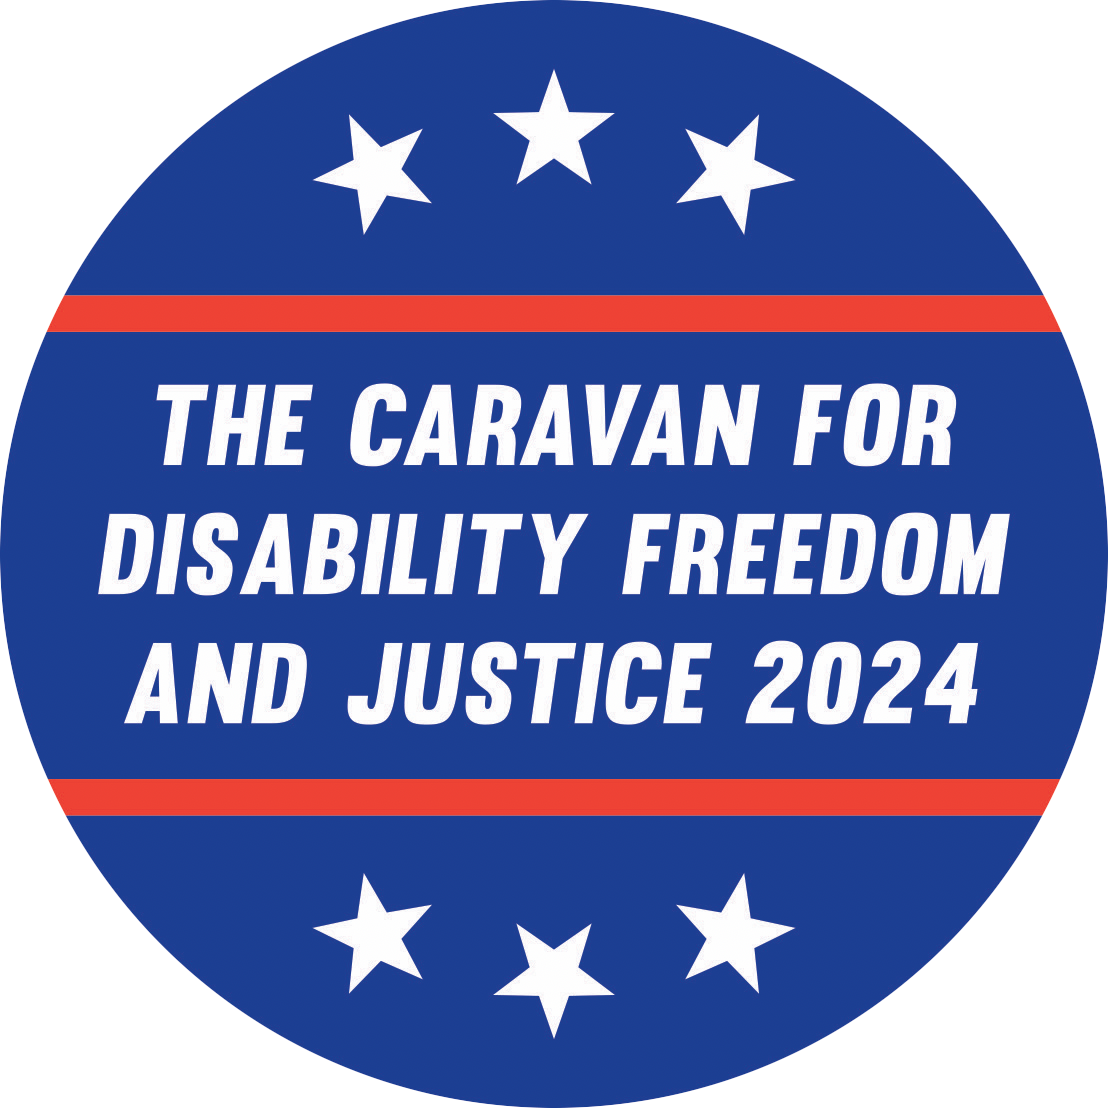 The Caravan for Disability Freedom and Justice logo